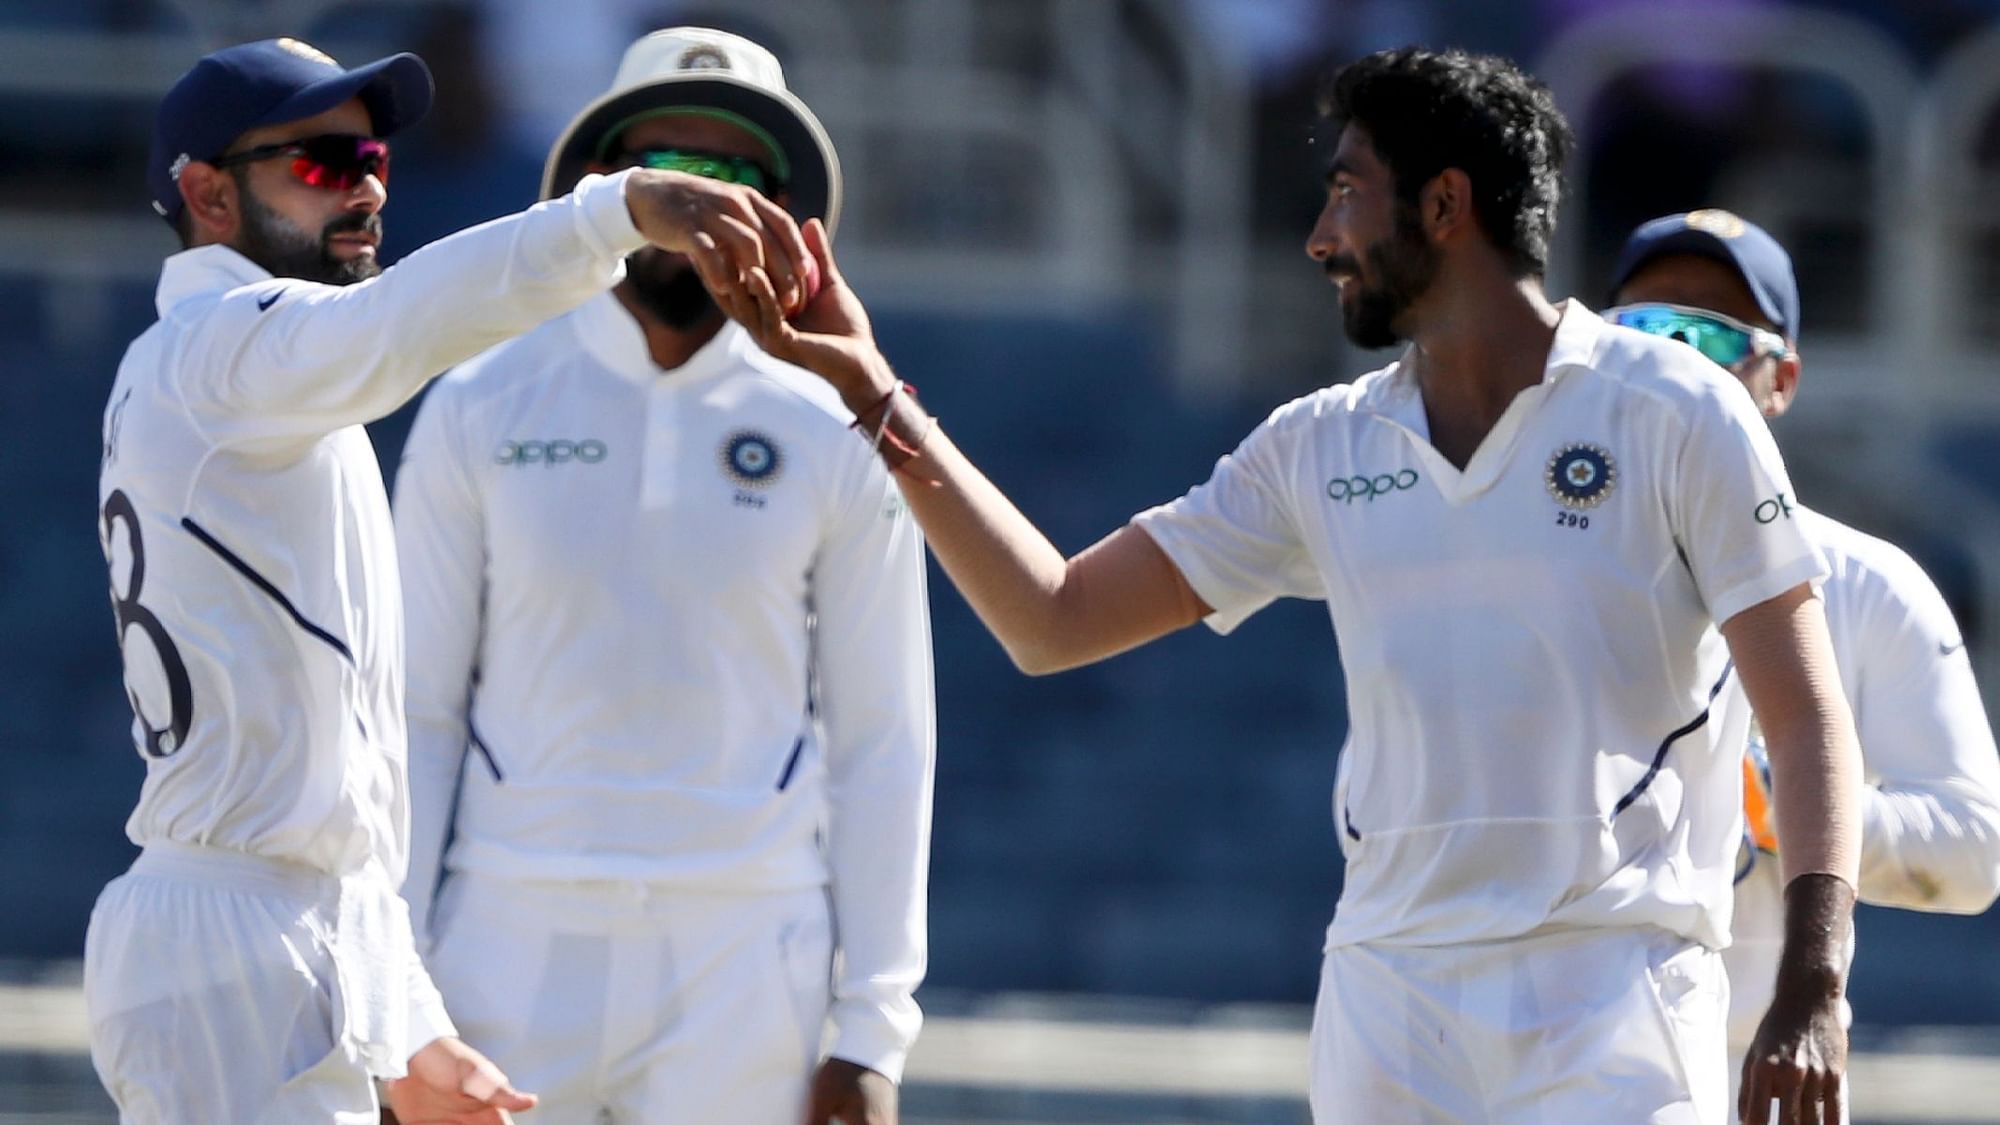 Jasprit Bumrah (left) became only the third Indian cricketer to take a Test hat-trick during 1st innings of the second Test.